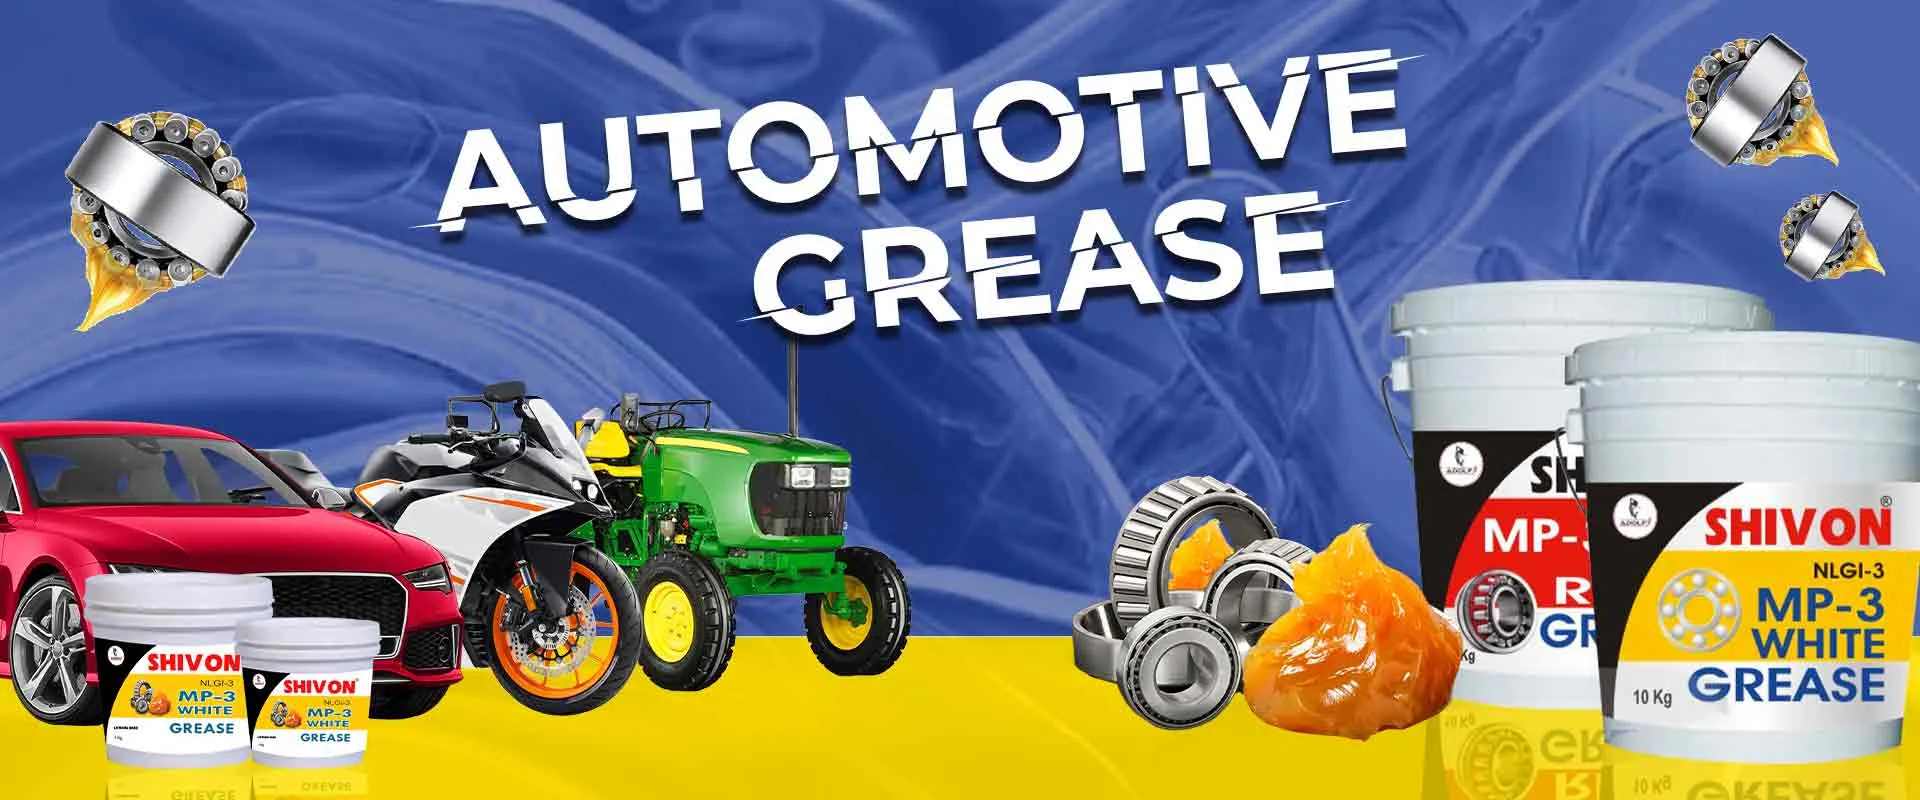 Automotive Grease In Babugarh